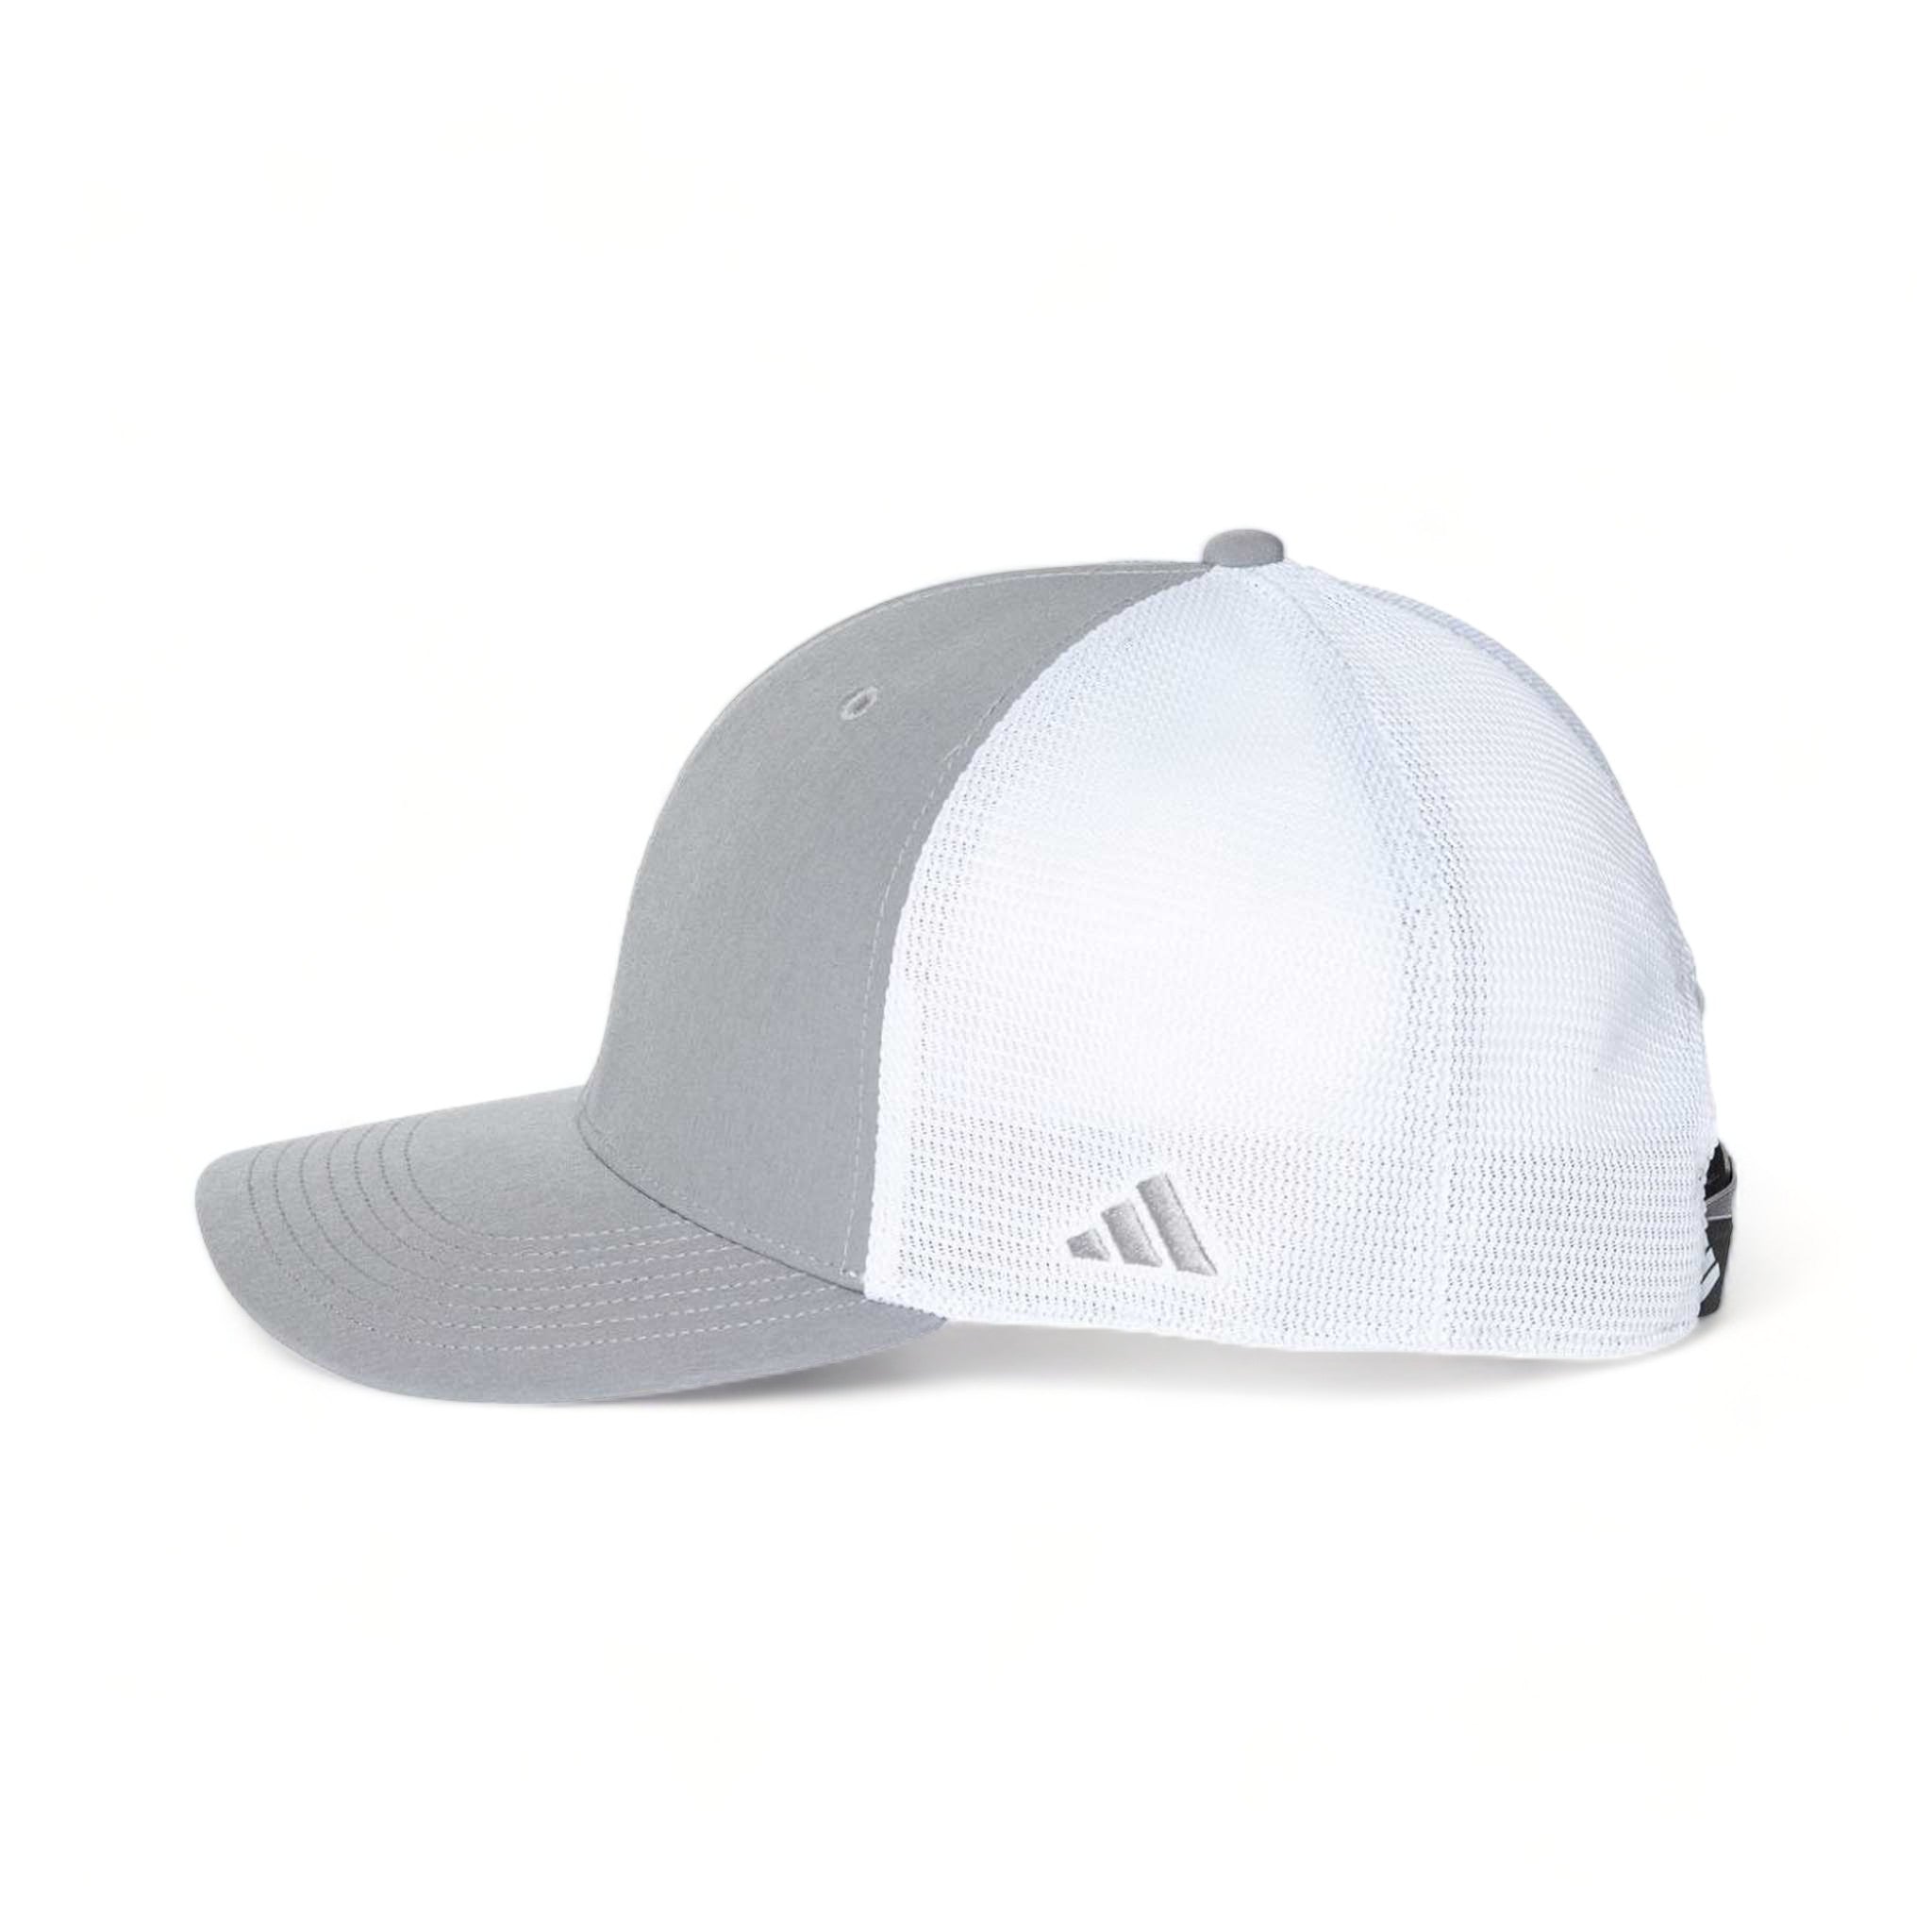 Side view of Adidas A627S custom hat in grey three